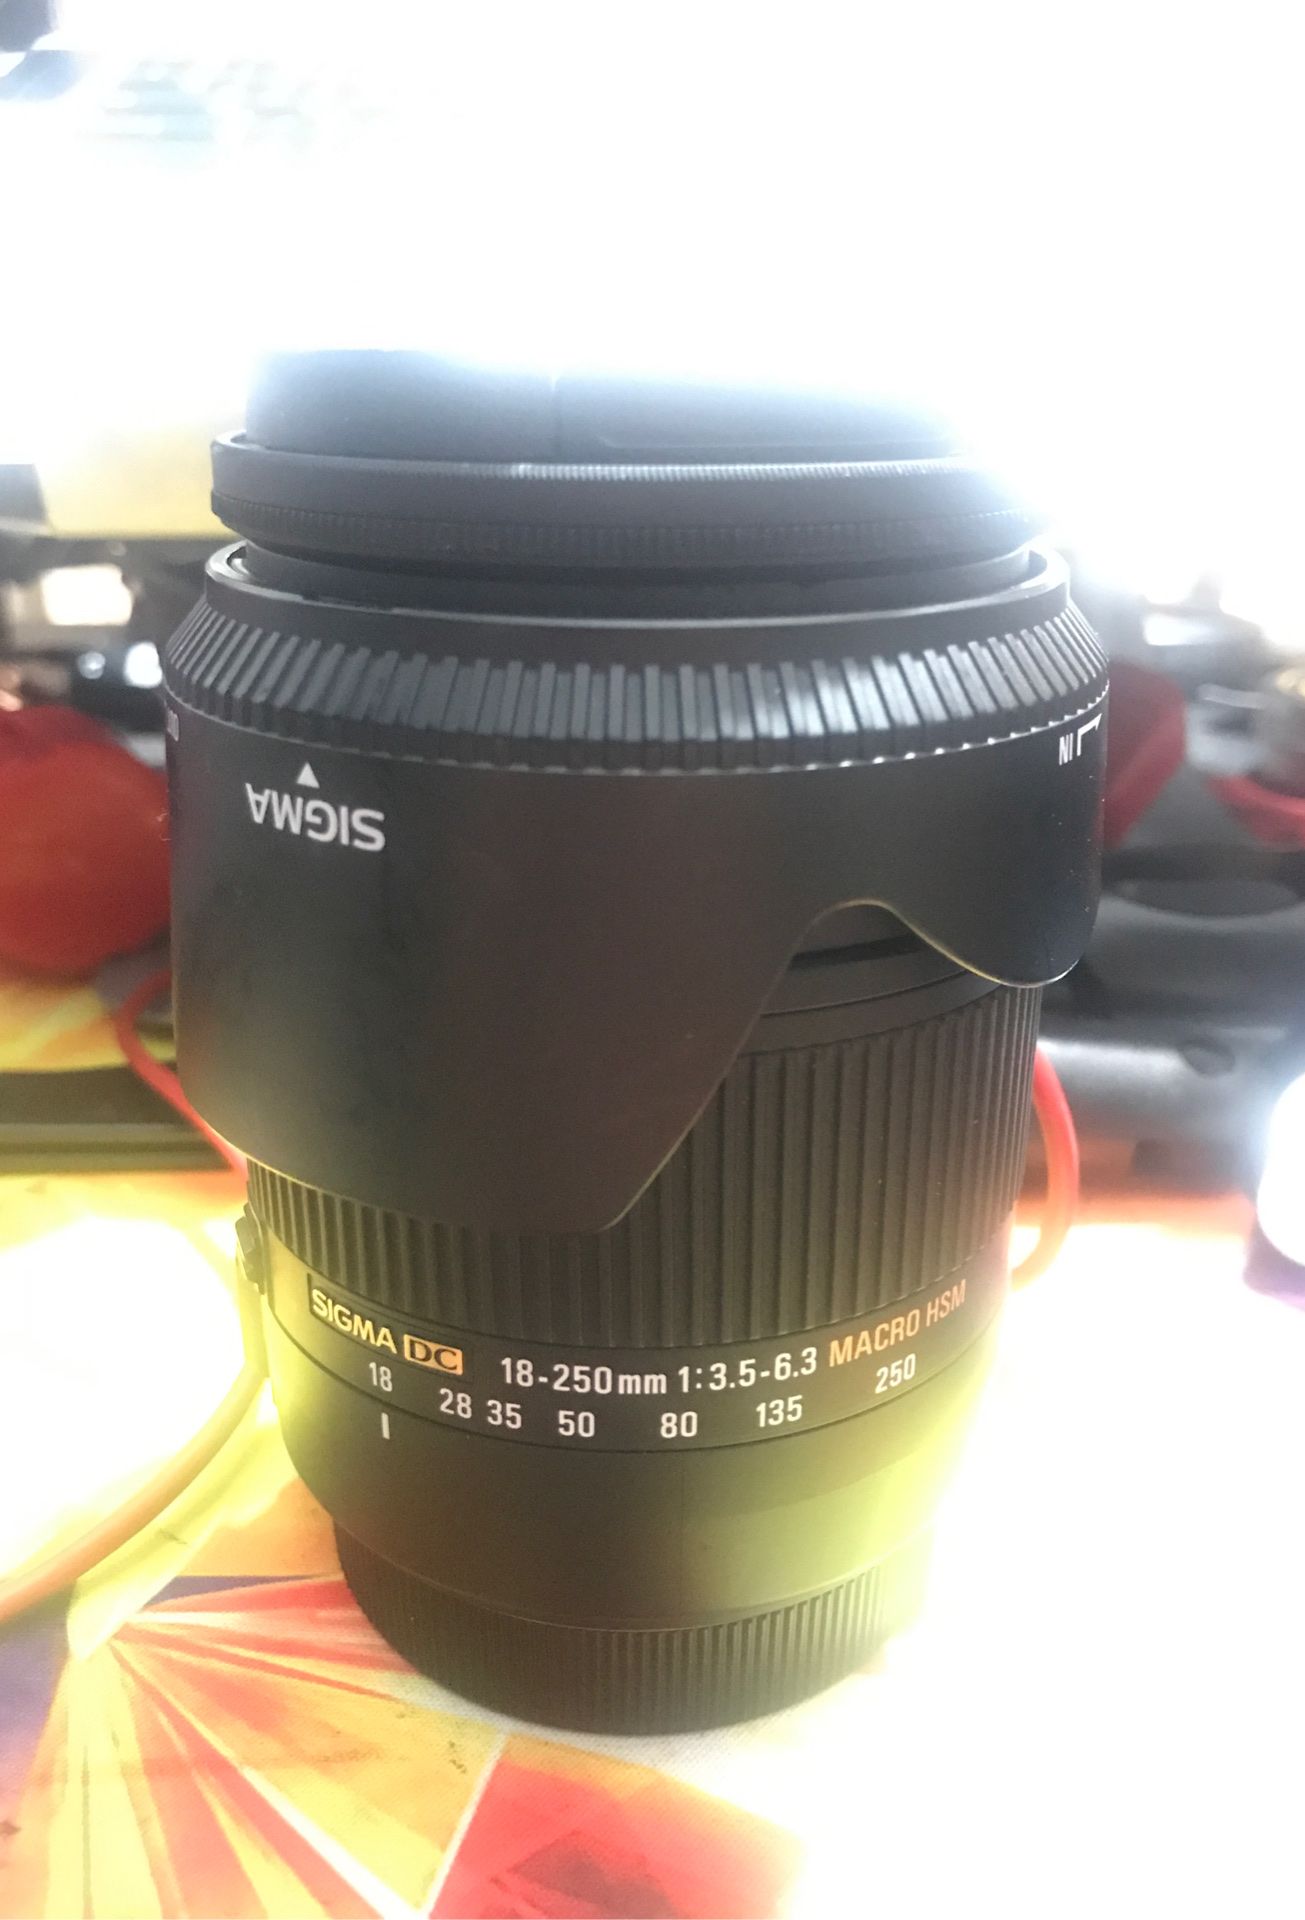 Sigma 18-250mm f.3.5-6.3 for canon Ef-Efs mount